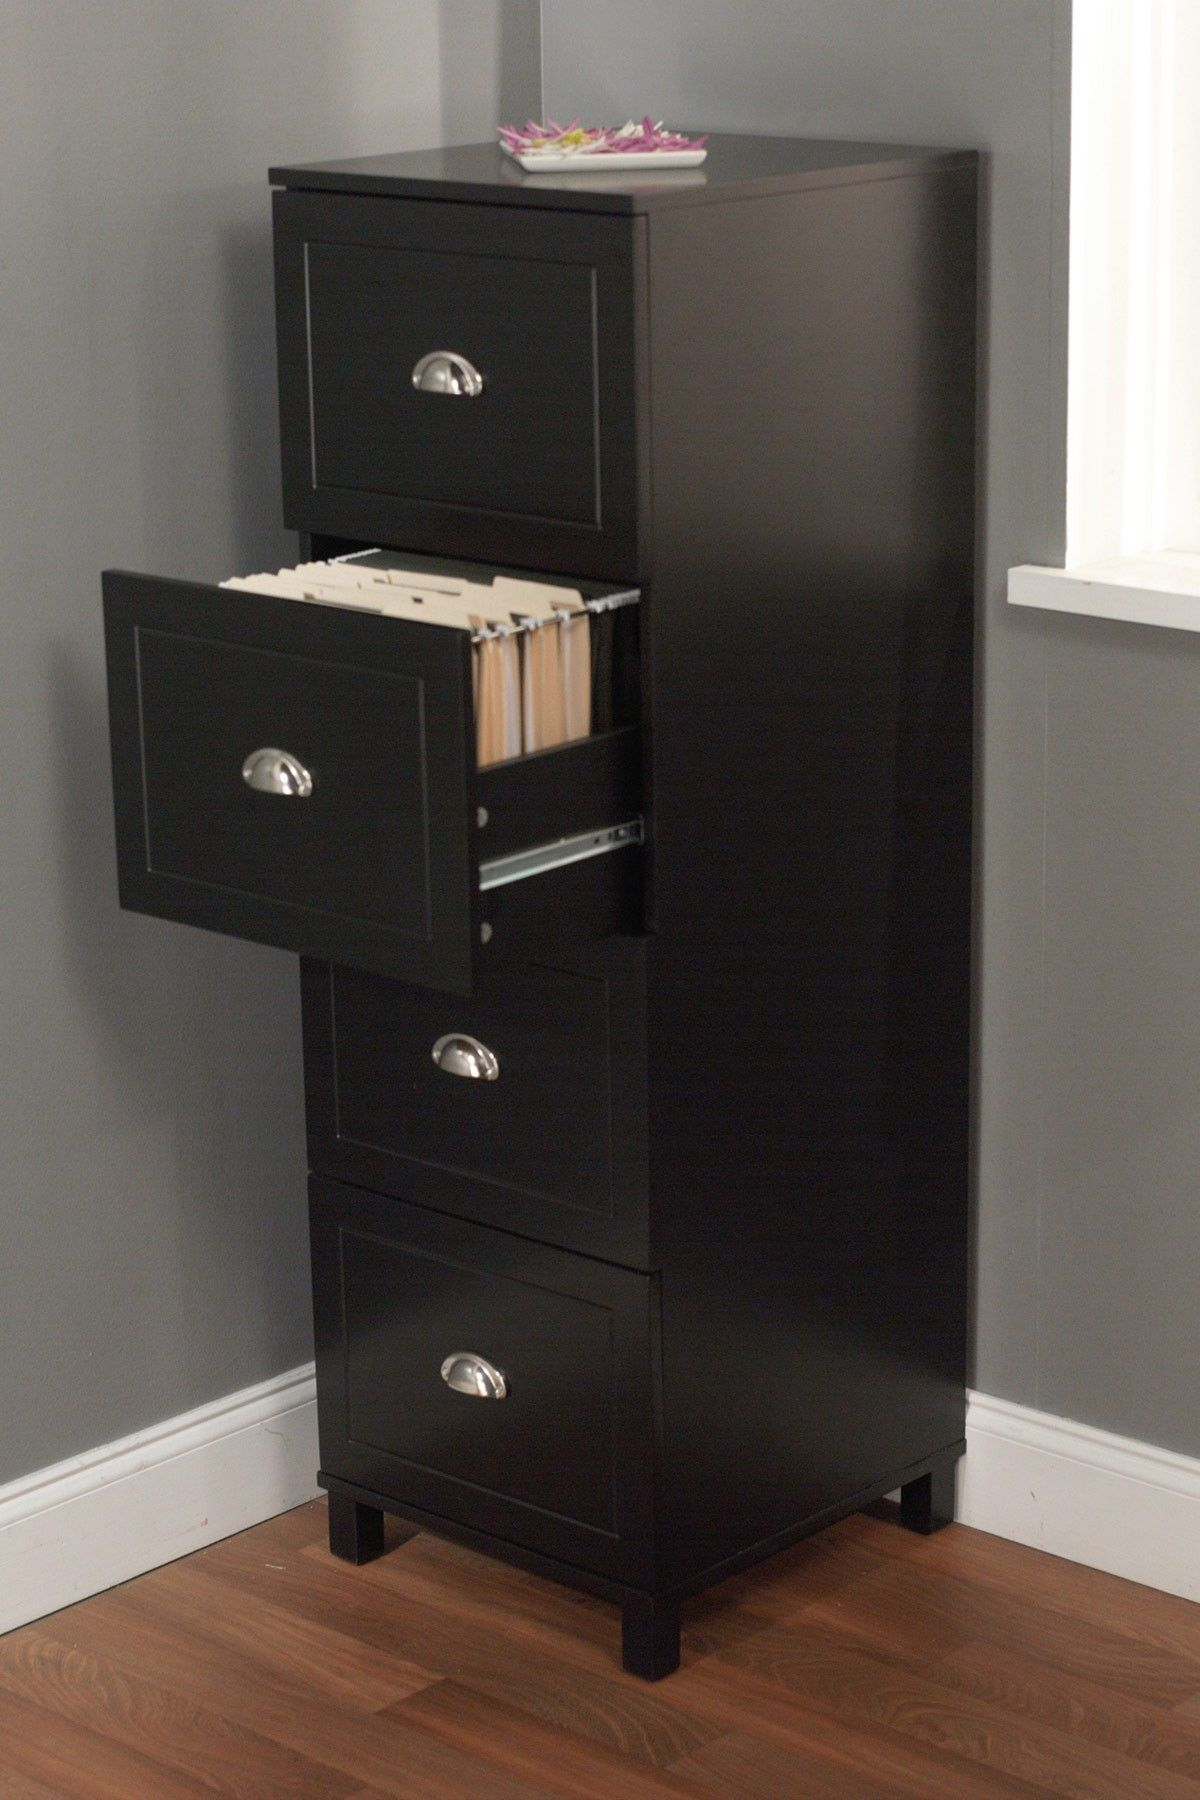 Bradley 4 Drawer Filing Cabinet Black My Preference Is The One In with size 1200 X 1800